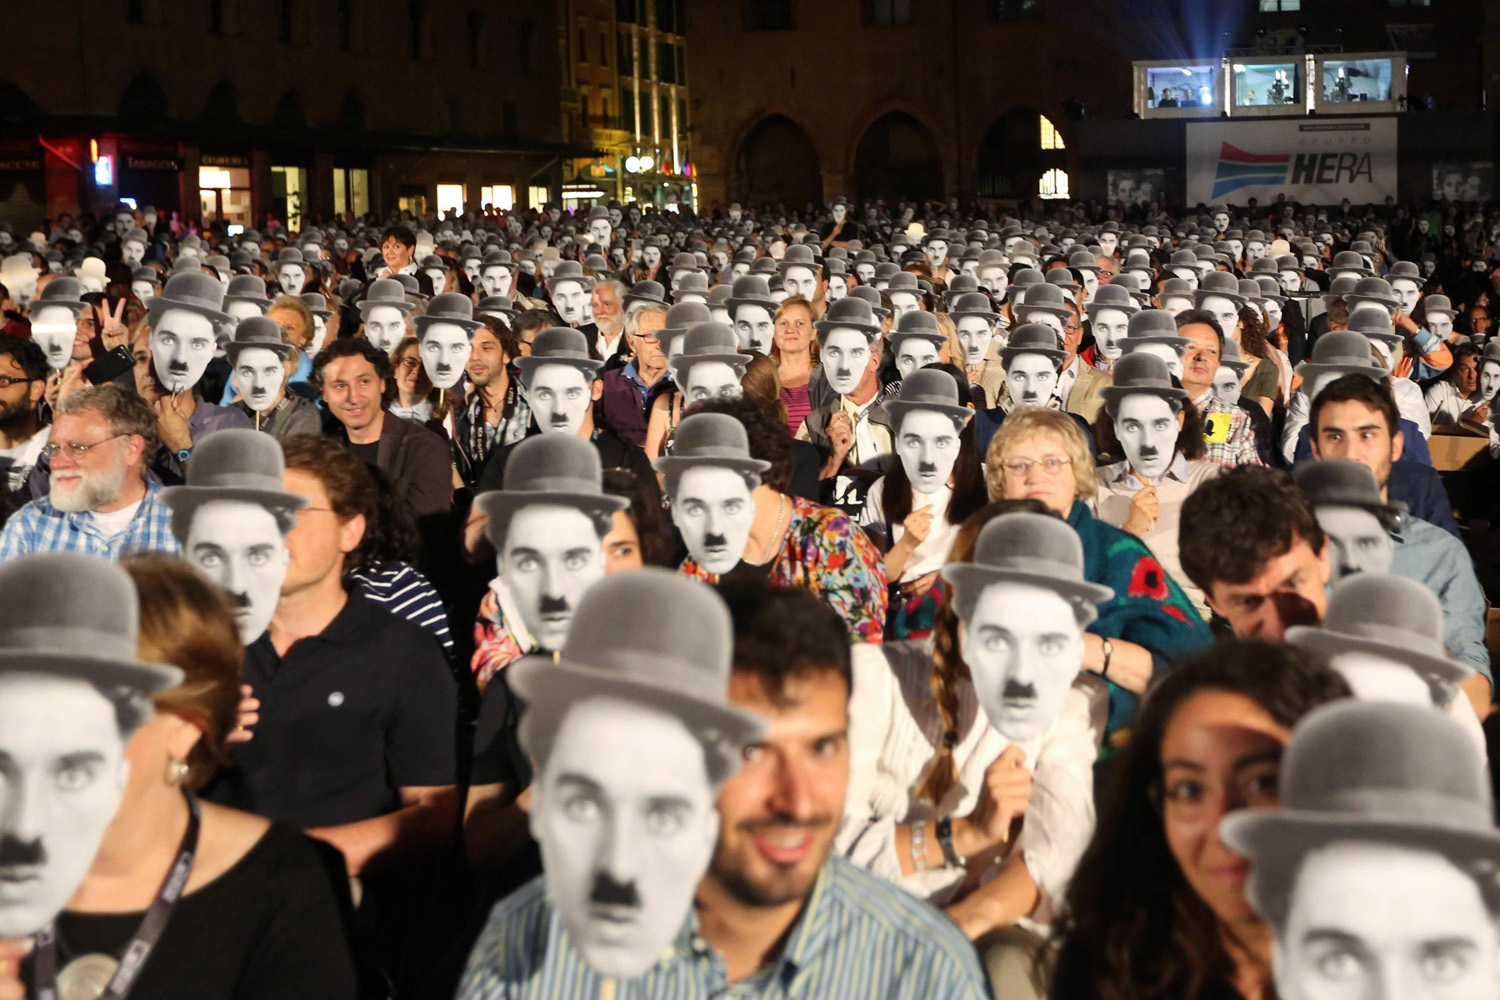 Members of the audience hold up face masks of the character 'The Little Tramp' (aka Charlot) on the occasion of the official celebrations for the centenary of the birth of British-born actor and filmmaker Charlie Chaplin during an outdoor live orchestral screening at Piazza Maggiore in Bologna, Italy, June 25, 2014.